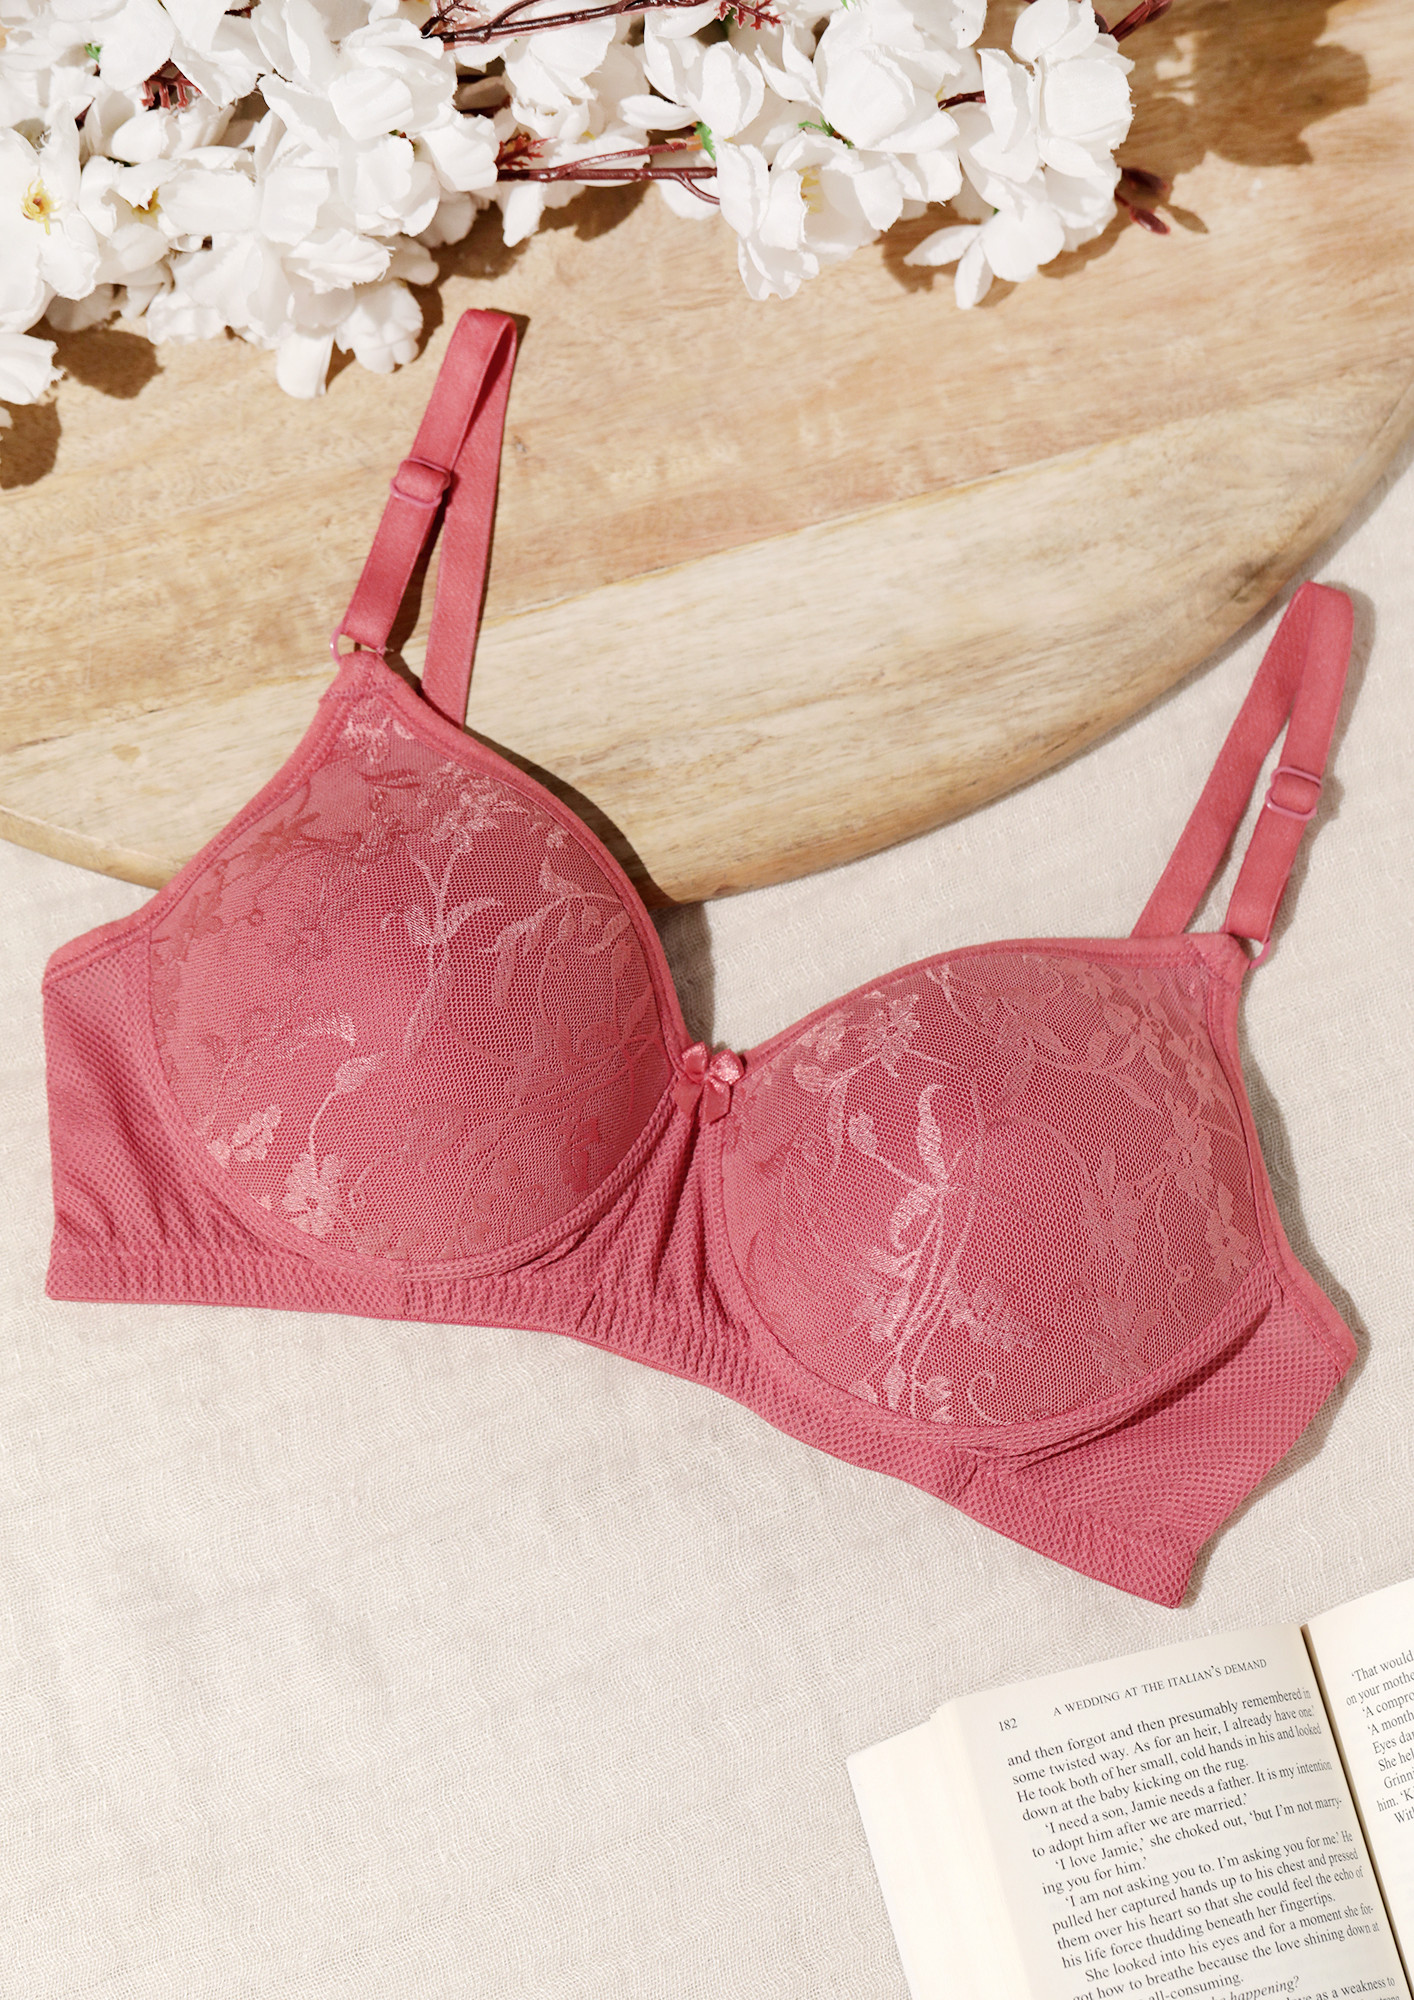 Buy SOFT PINK PADDED REGULAR LACY BRA for Women Online in India